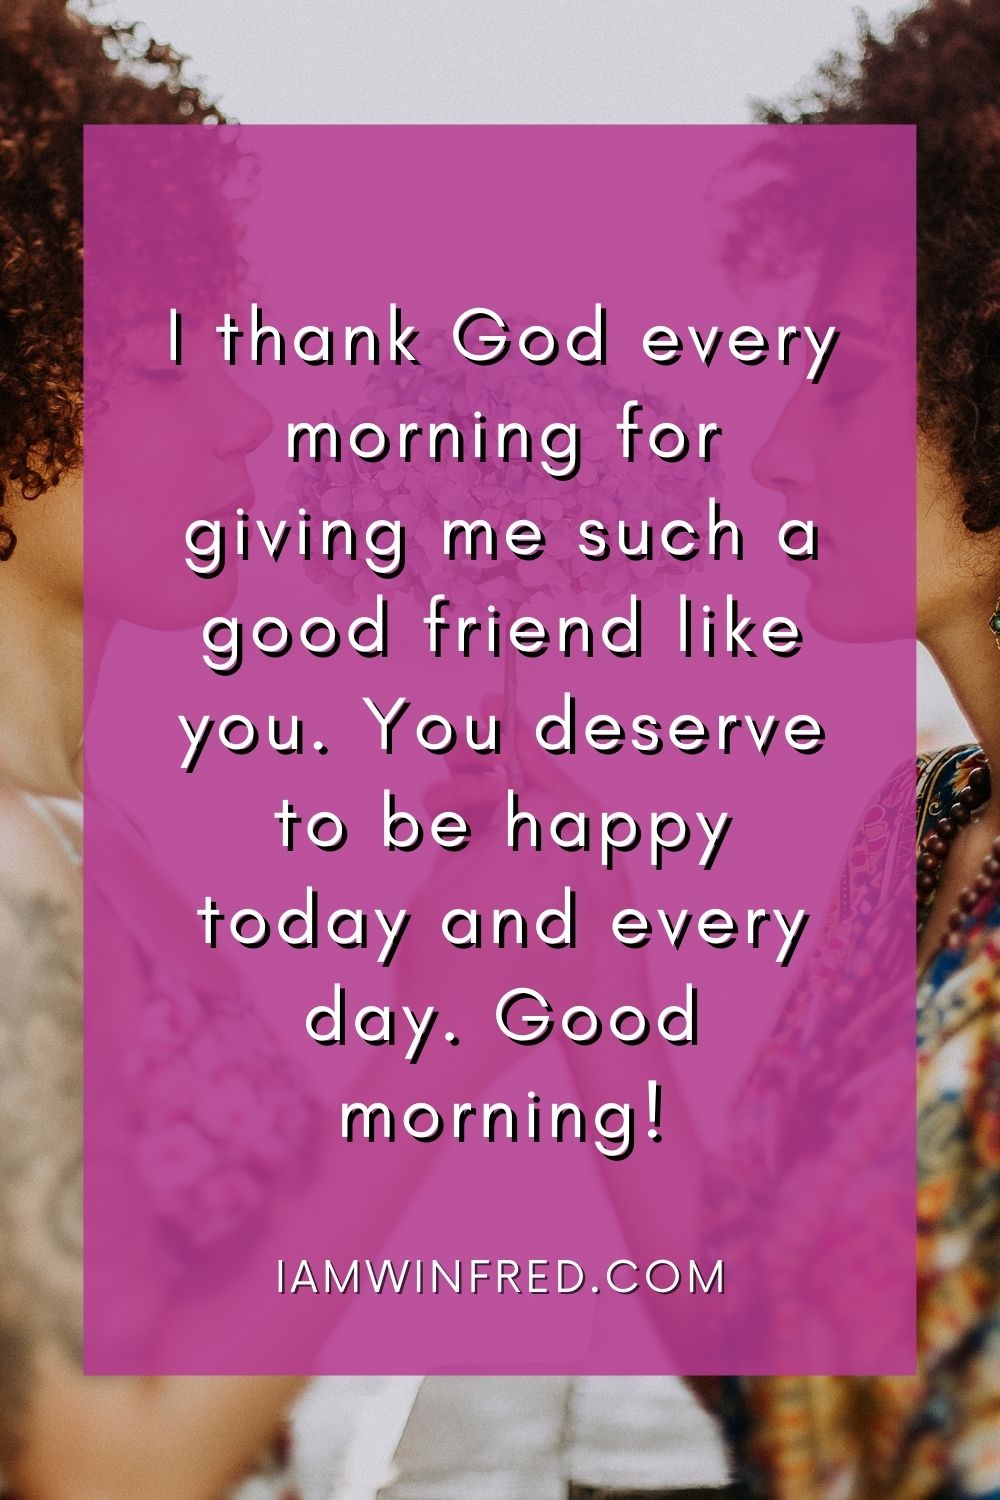 I Thank God Every Morning For Giving Me Such A Good Friend Like You. You Deserve To Be Happy Today And Every Day. Good Morning